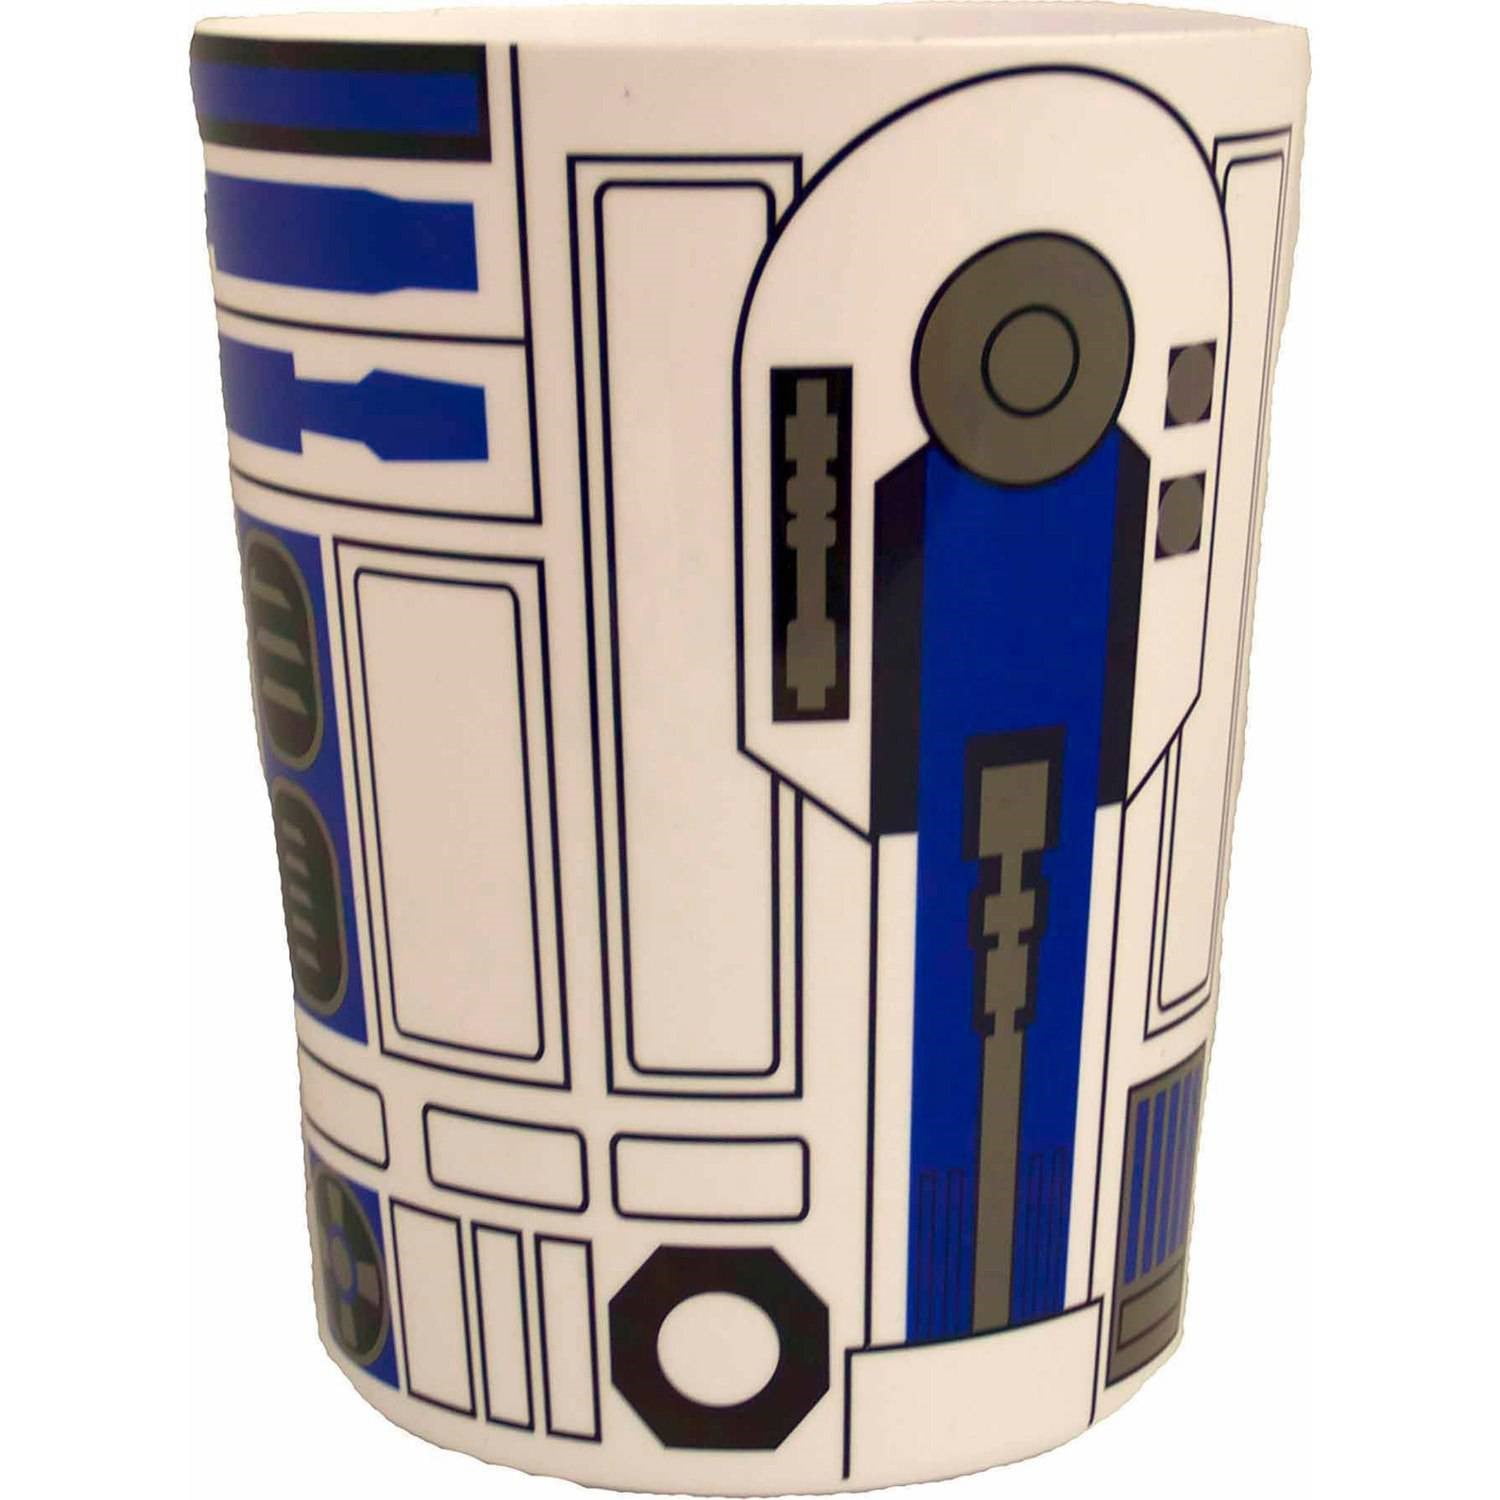 It features a cool design of the infamous R2D2 character. 